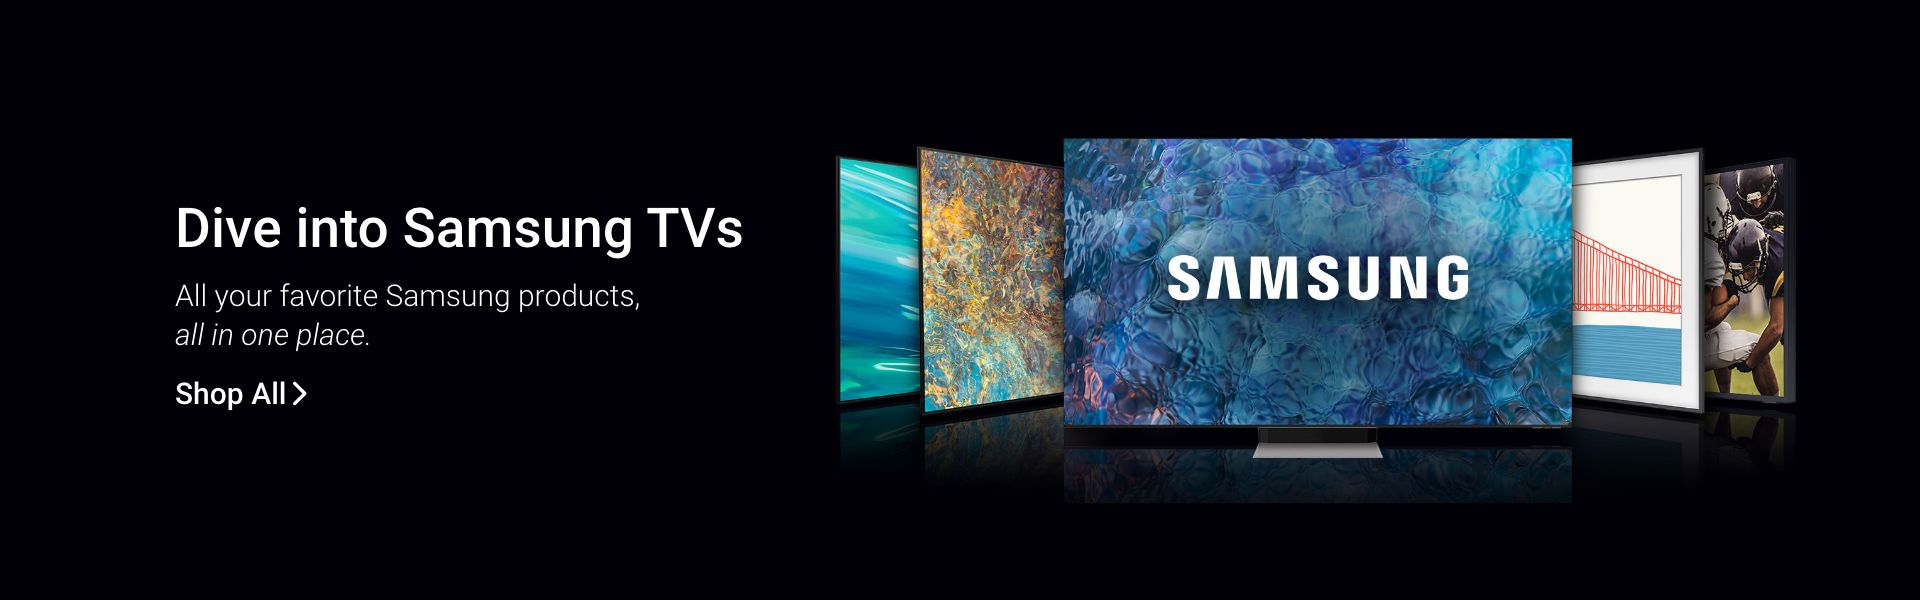 Dive into Samsung TVs. All your favorite Samsung products, all in one place. Click to shop all.